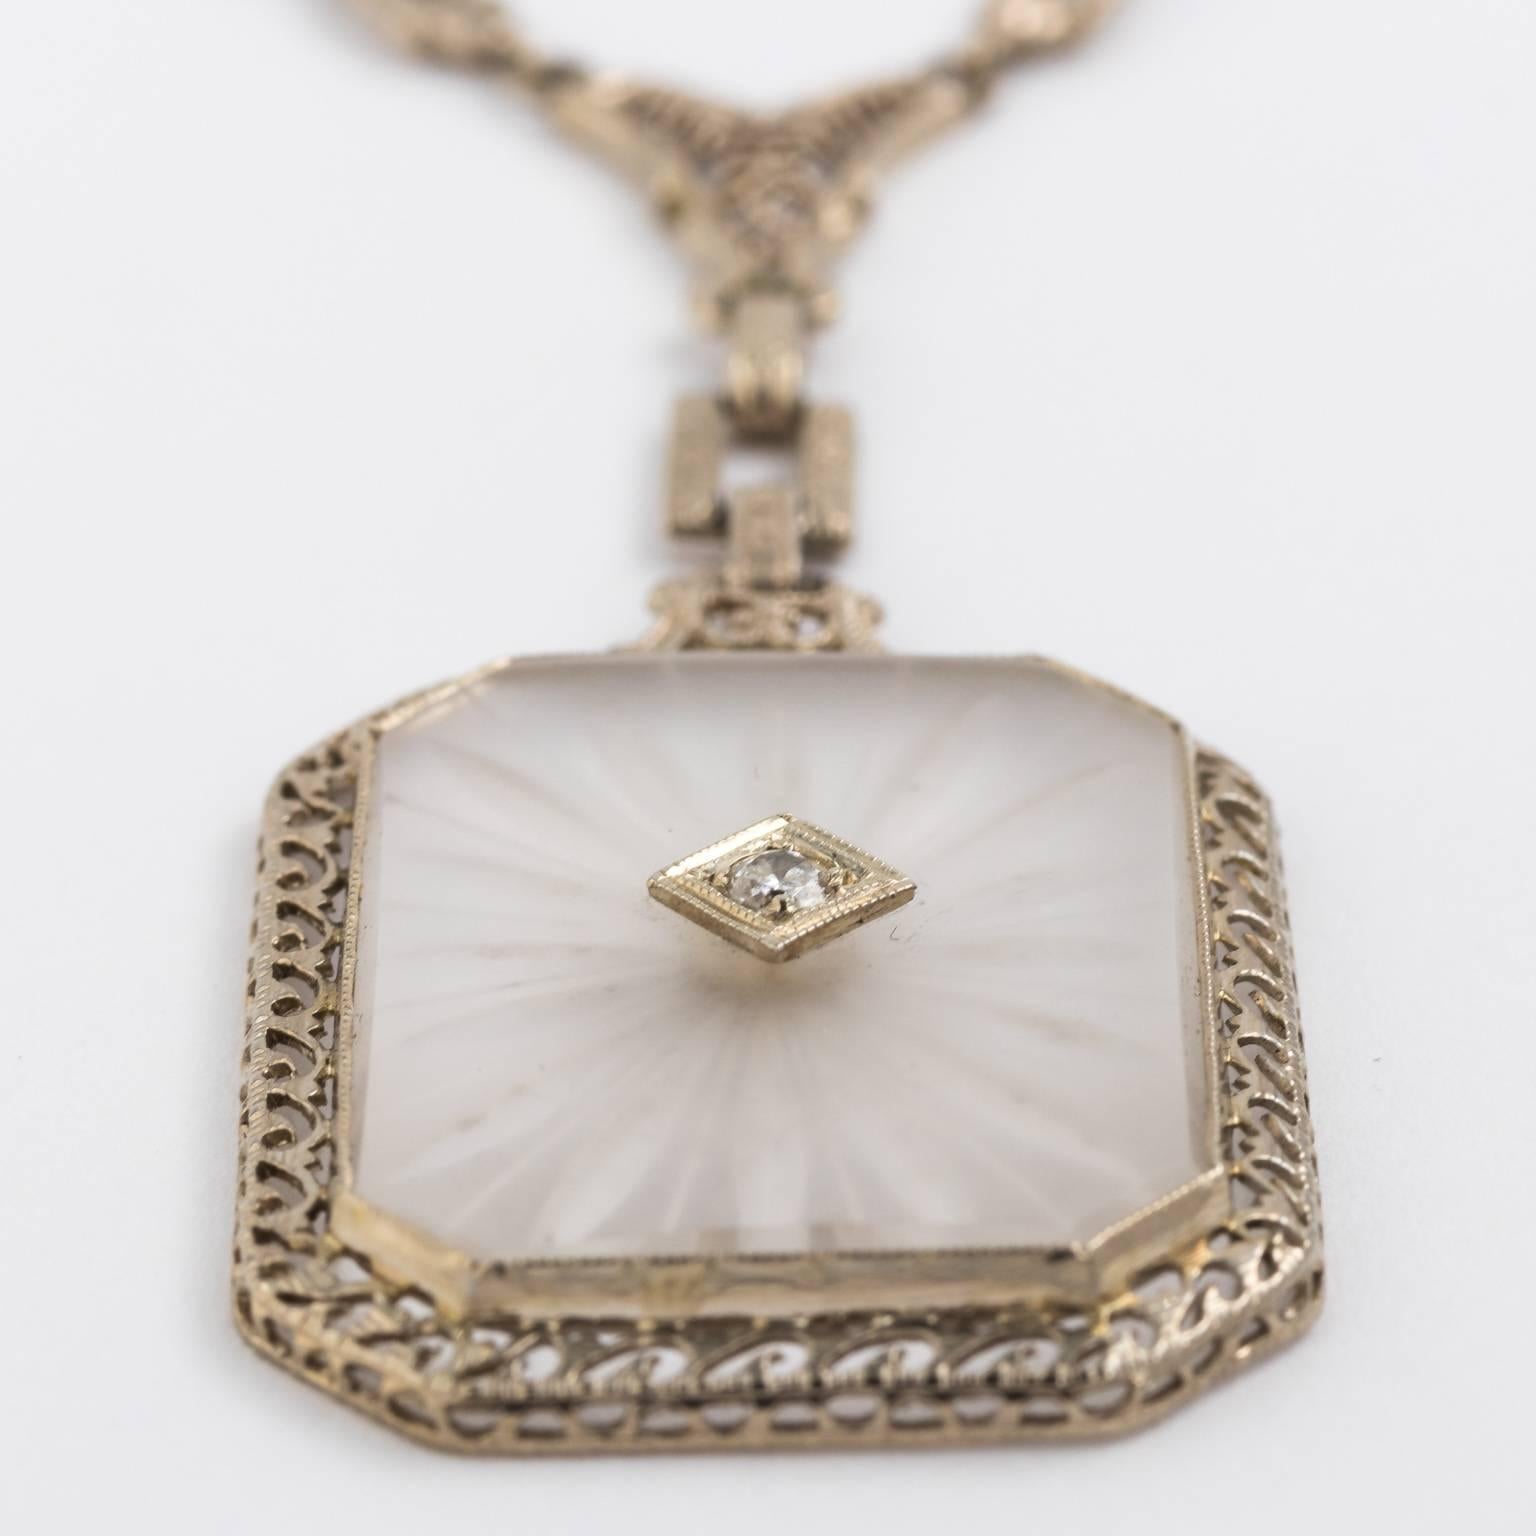 This necklace from 1920's constructed from solid 14K white gold, the center pieces is a hand carved frosted rock crystal with a transition cut diamonds that measures about 5 points. The rock crystal is 1 X 3/4 inches and the pendant dangles about 2